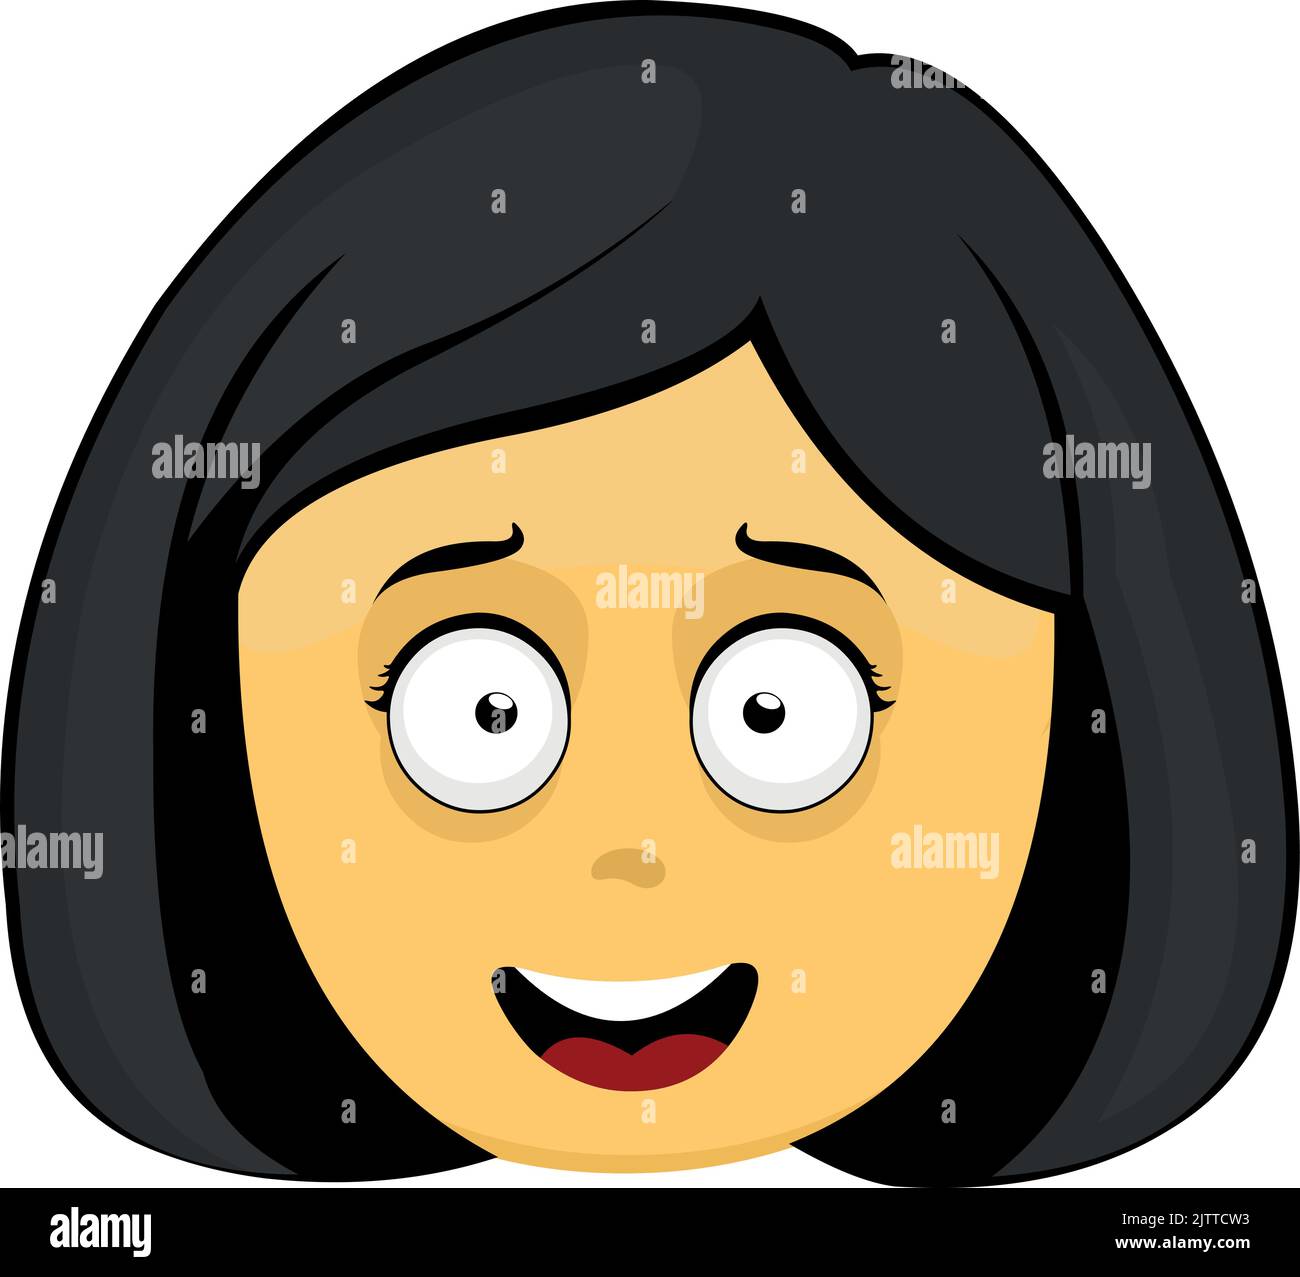 Vector illustration of the face of an emoticon of a woman in yellow with a happy expression Stock Vector